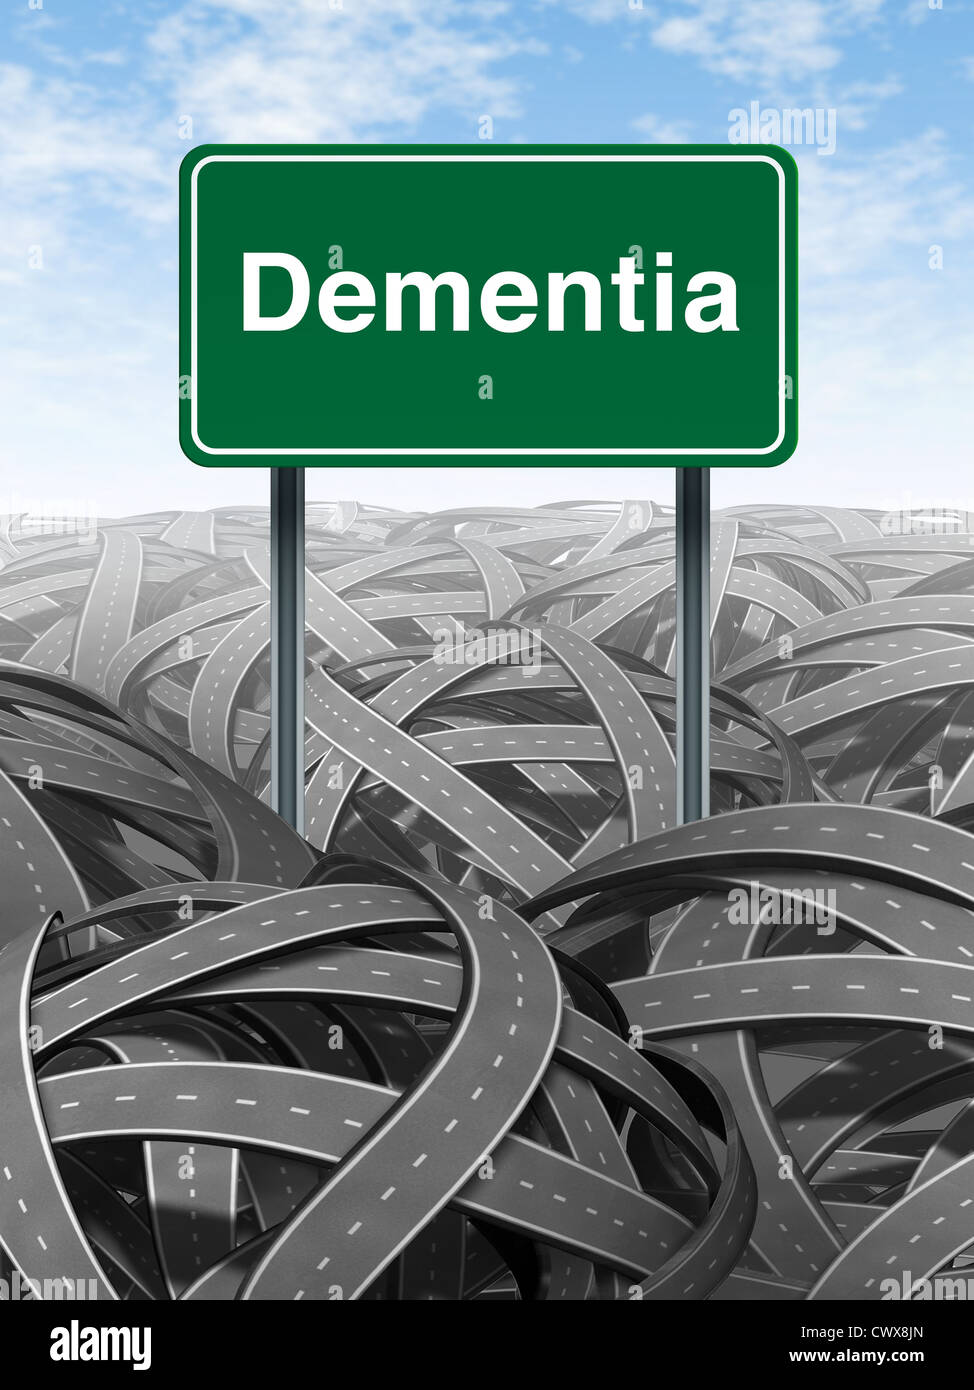 Dementia and alzheimer Disease medical concept with a green highway road sign with text refering to memory loss and human brain Stock Photo